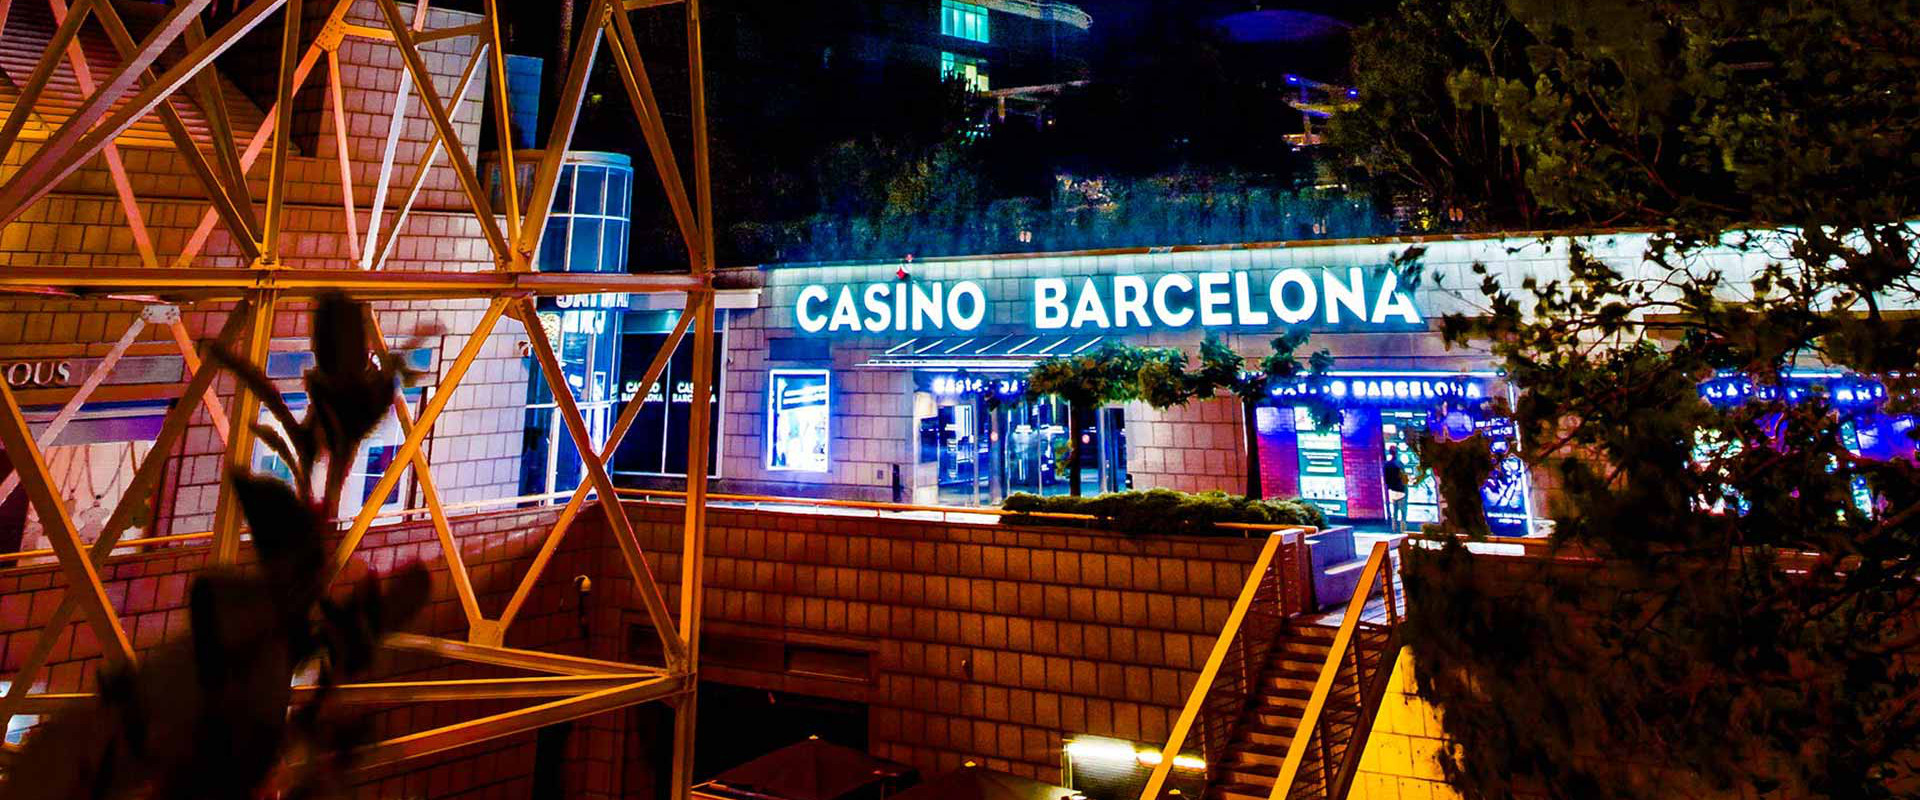 Partypoker Millions Back on Tour, European Championship Heads to Casino Barcelona